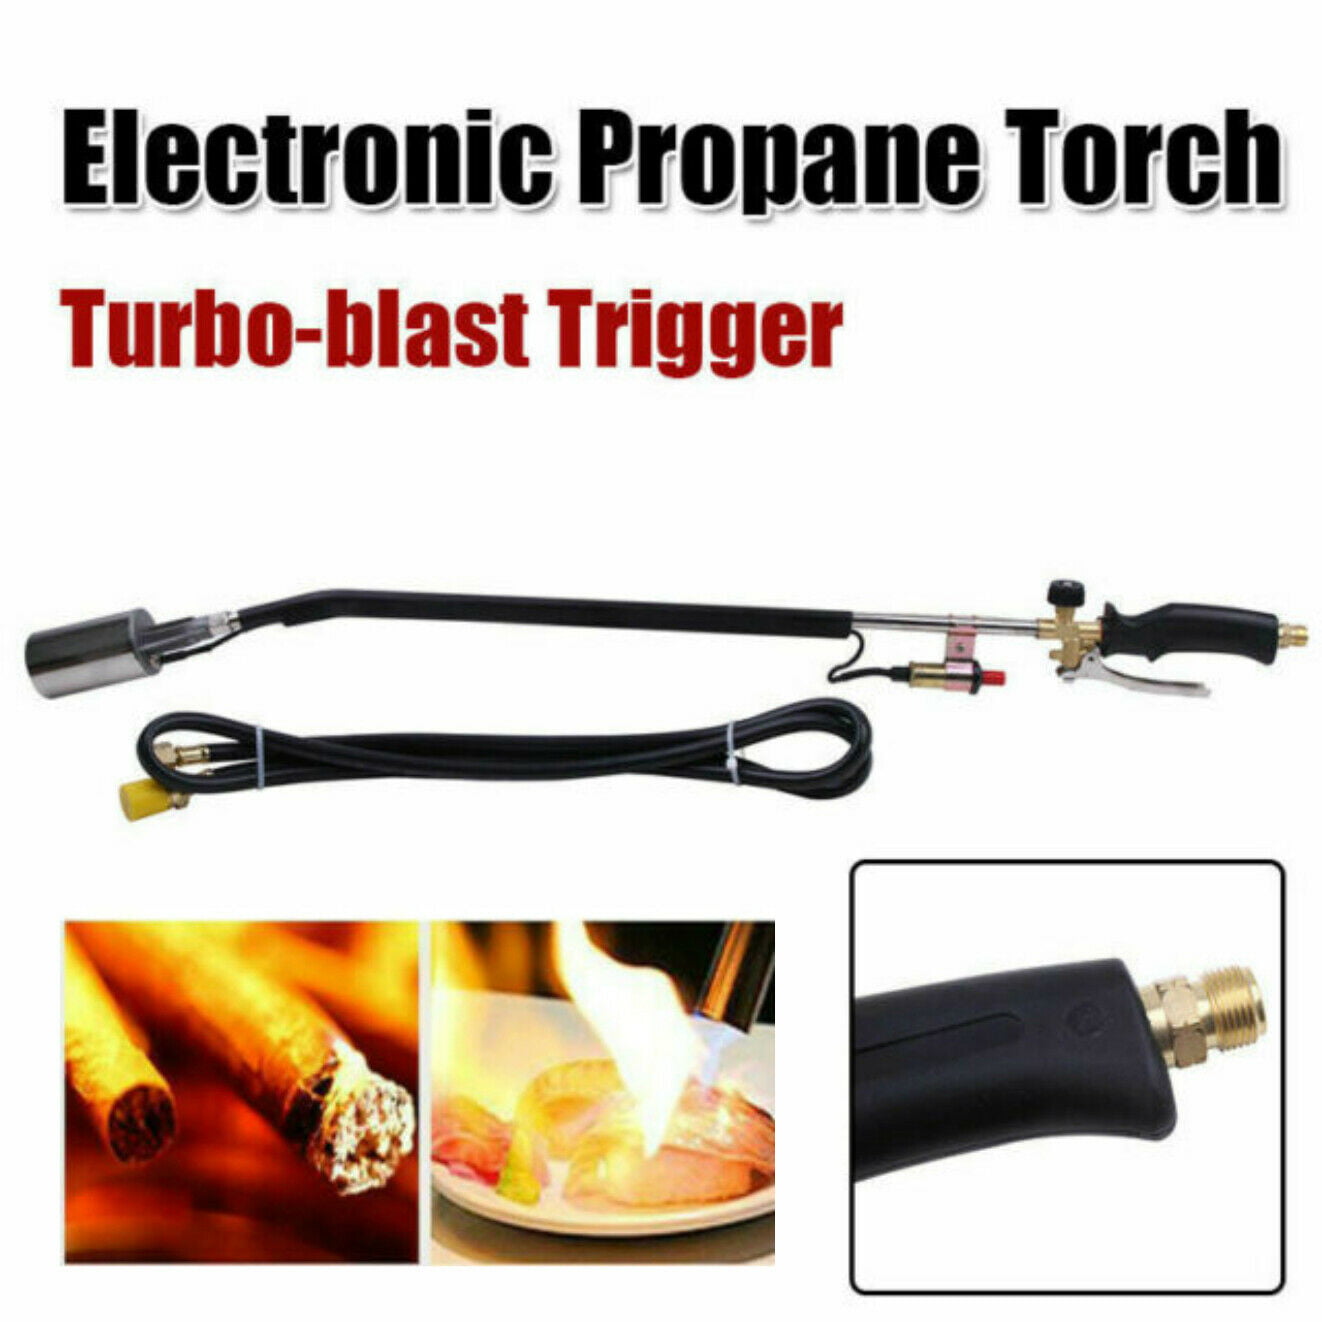 Details about   Electric 500000 Propane Torch Ice Melter Weed Burner Roofing Turbo-blast Trigger 